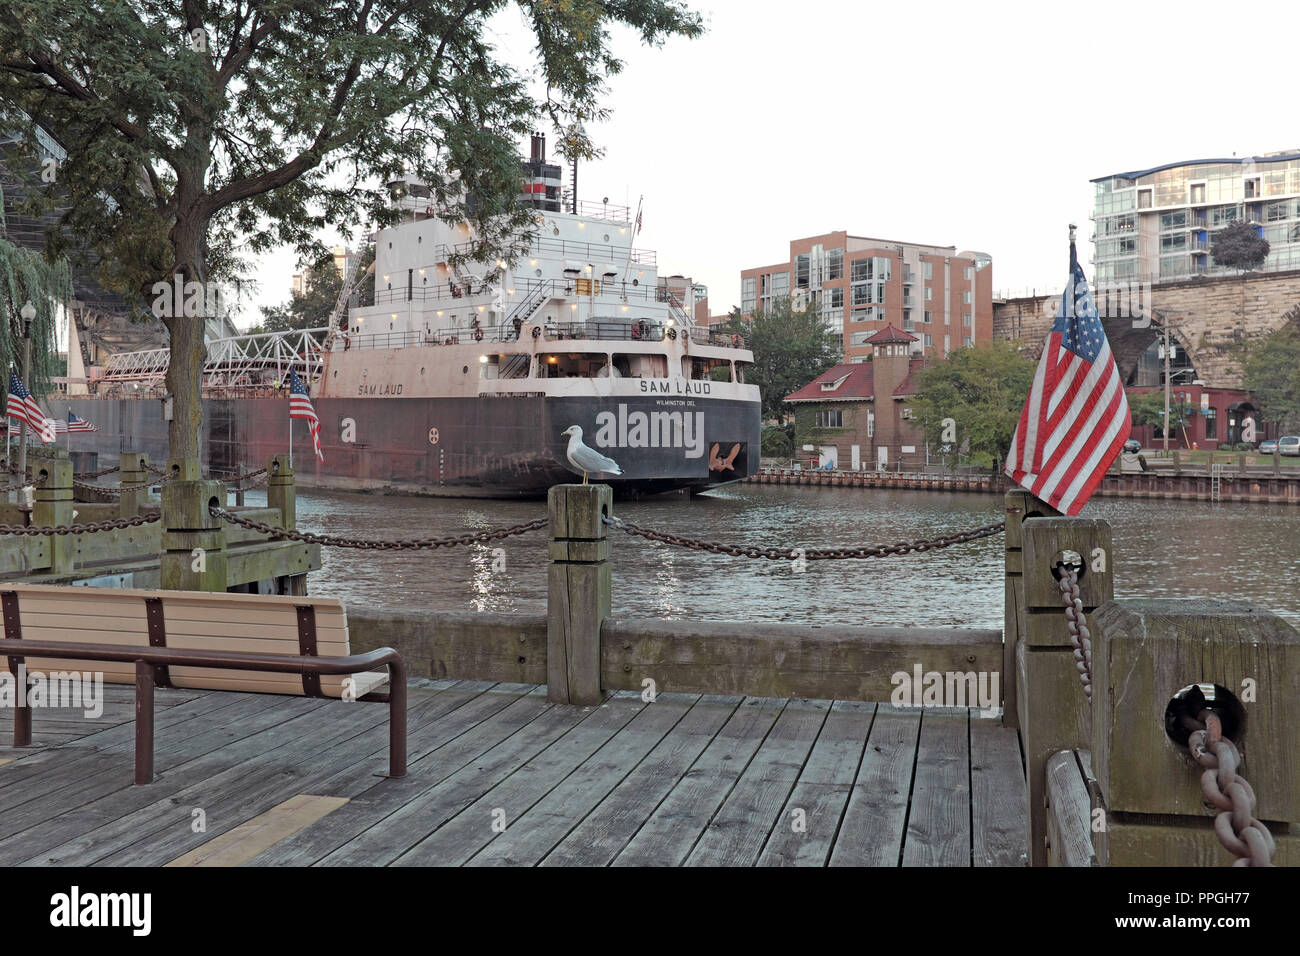 A bench in Heritage Park on the banks of the Cuyahoga River offers a view of water vessel traffic, like the M/V Sam Laud, in Cleveland, Ohio, USA. Stock Photo